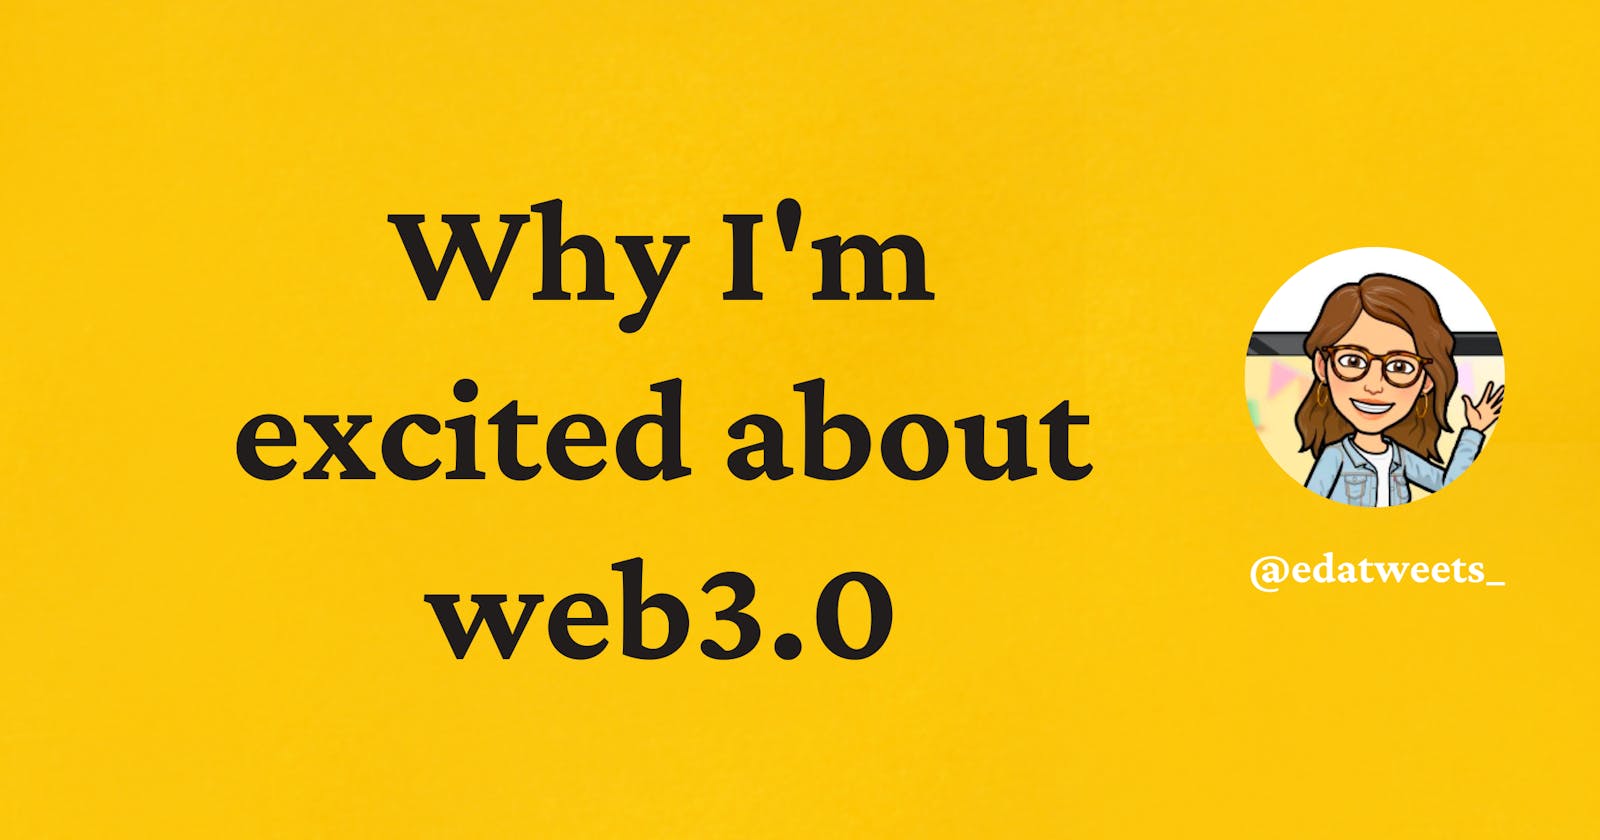 Why I'm excited about web3.0